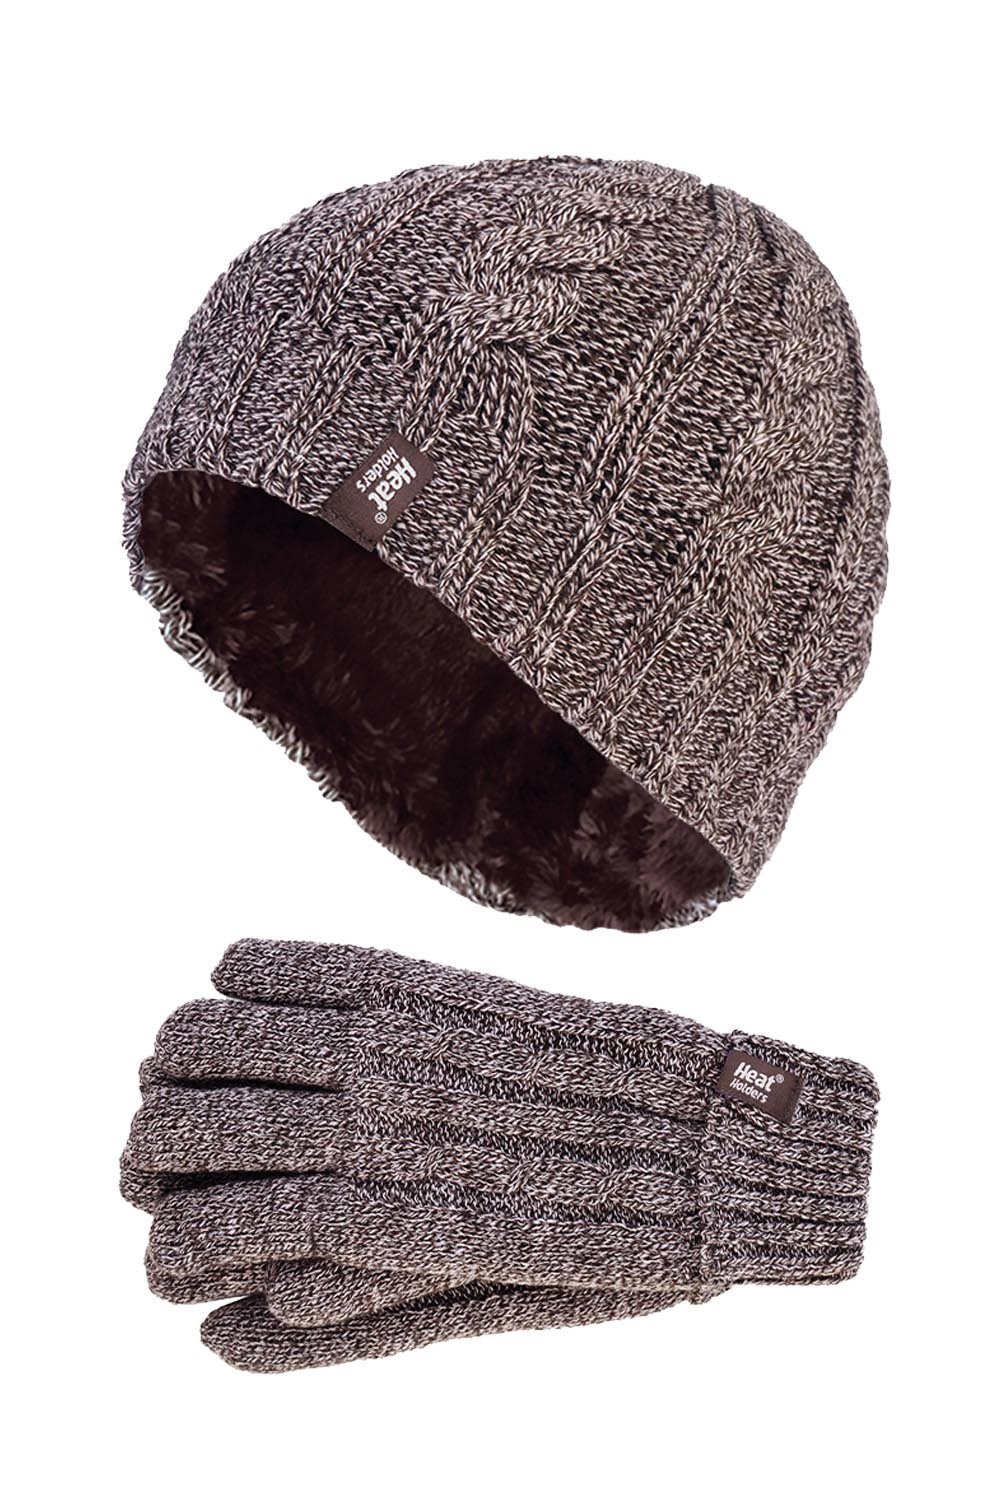 Womens Thermal Winter Hat and Gloves Set -